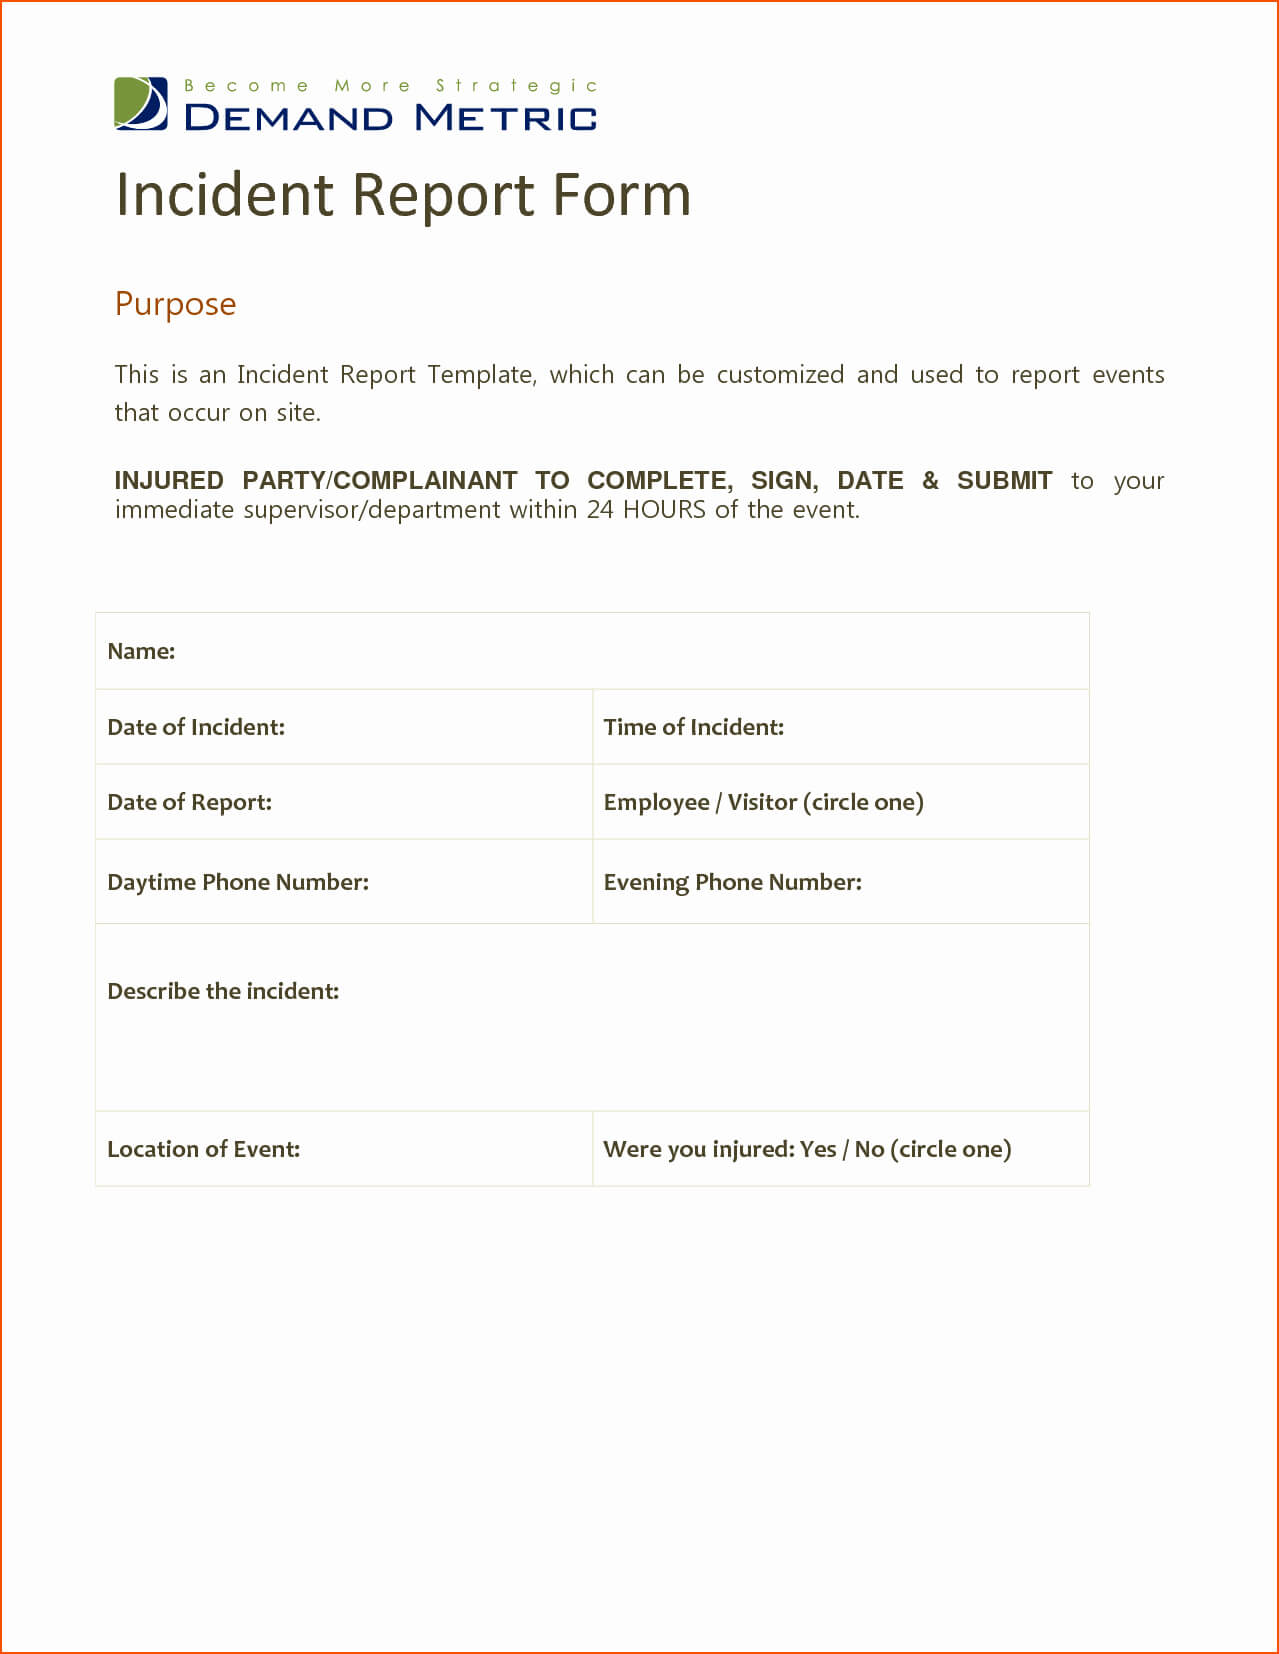 Incident Report Template Microsoft Best Of Incident Report With Incident Report Template Microsoft